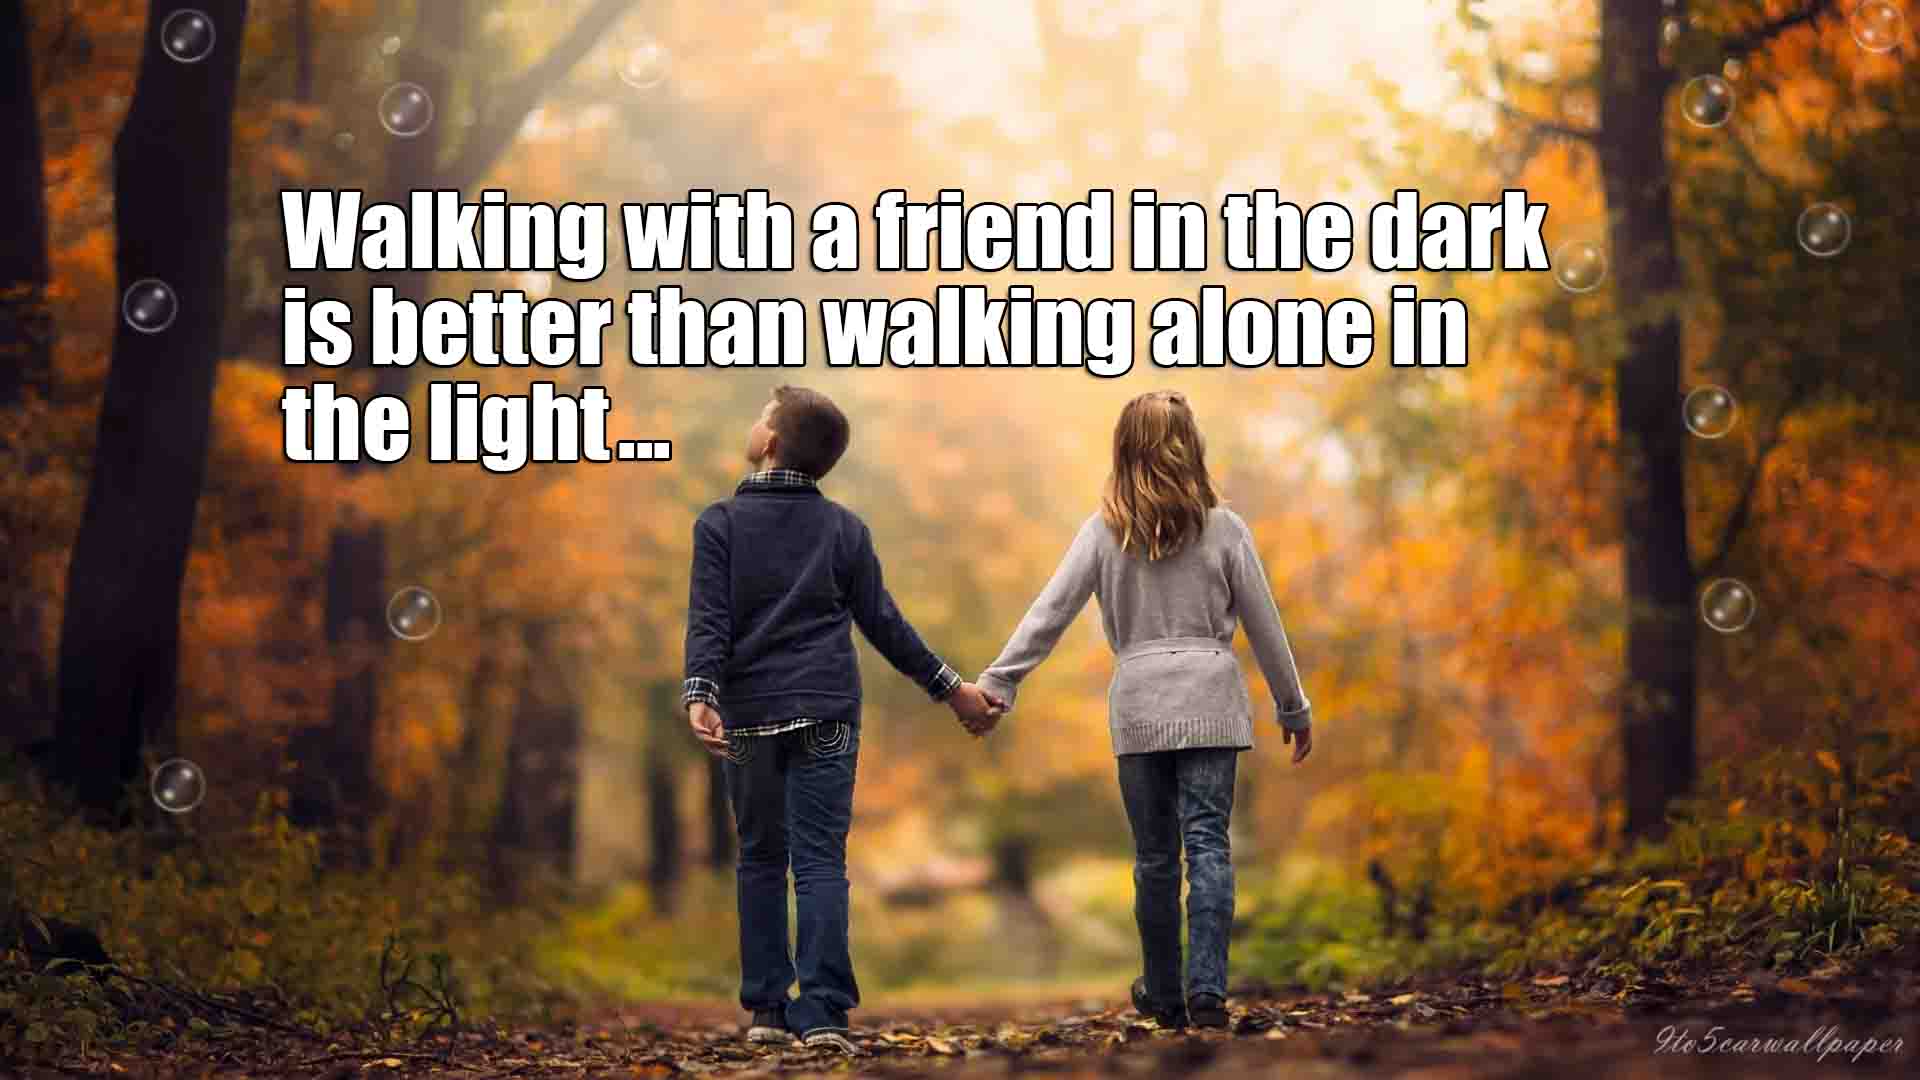 Friendship-Quotes-and-Sayings-Pics